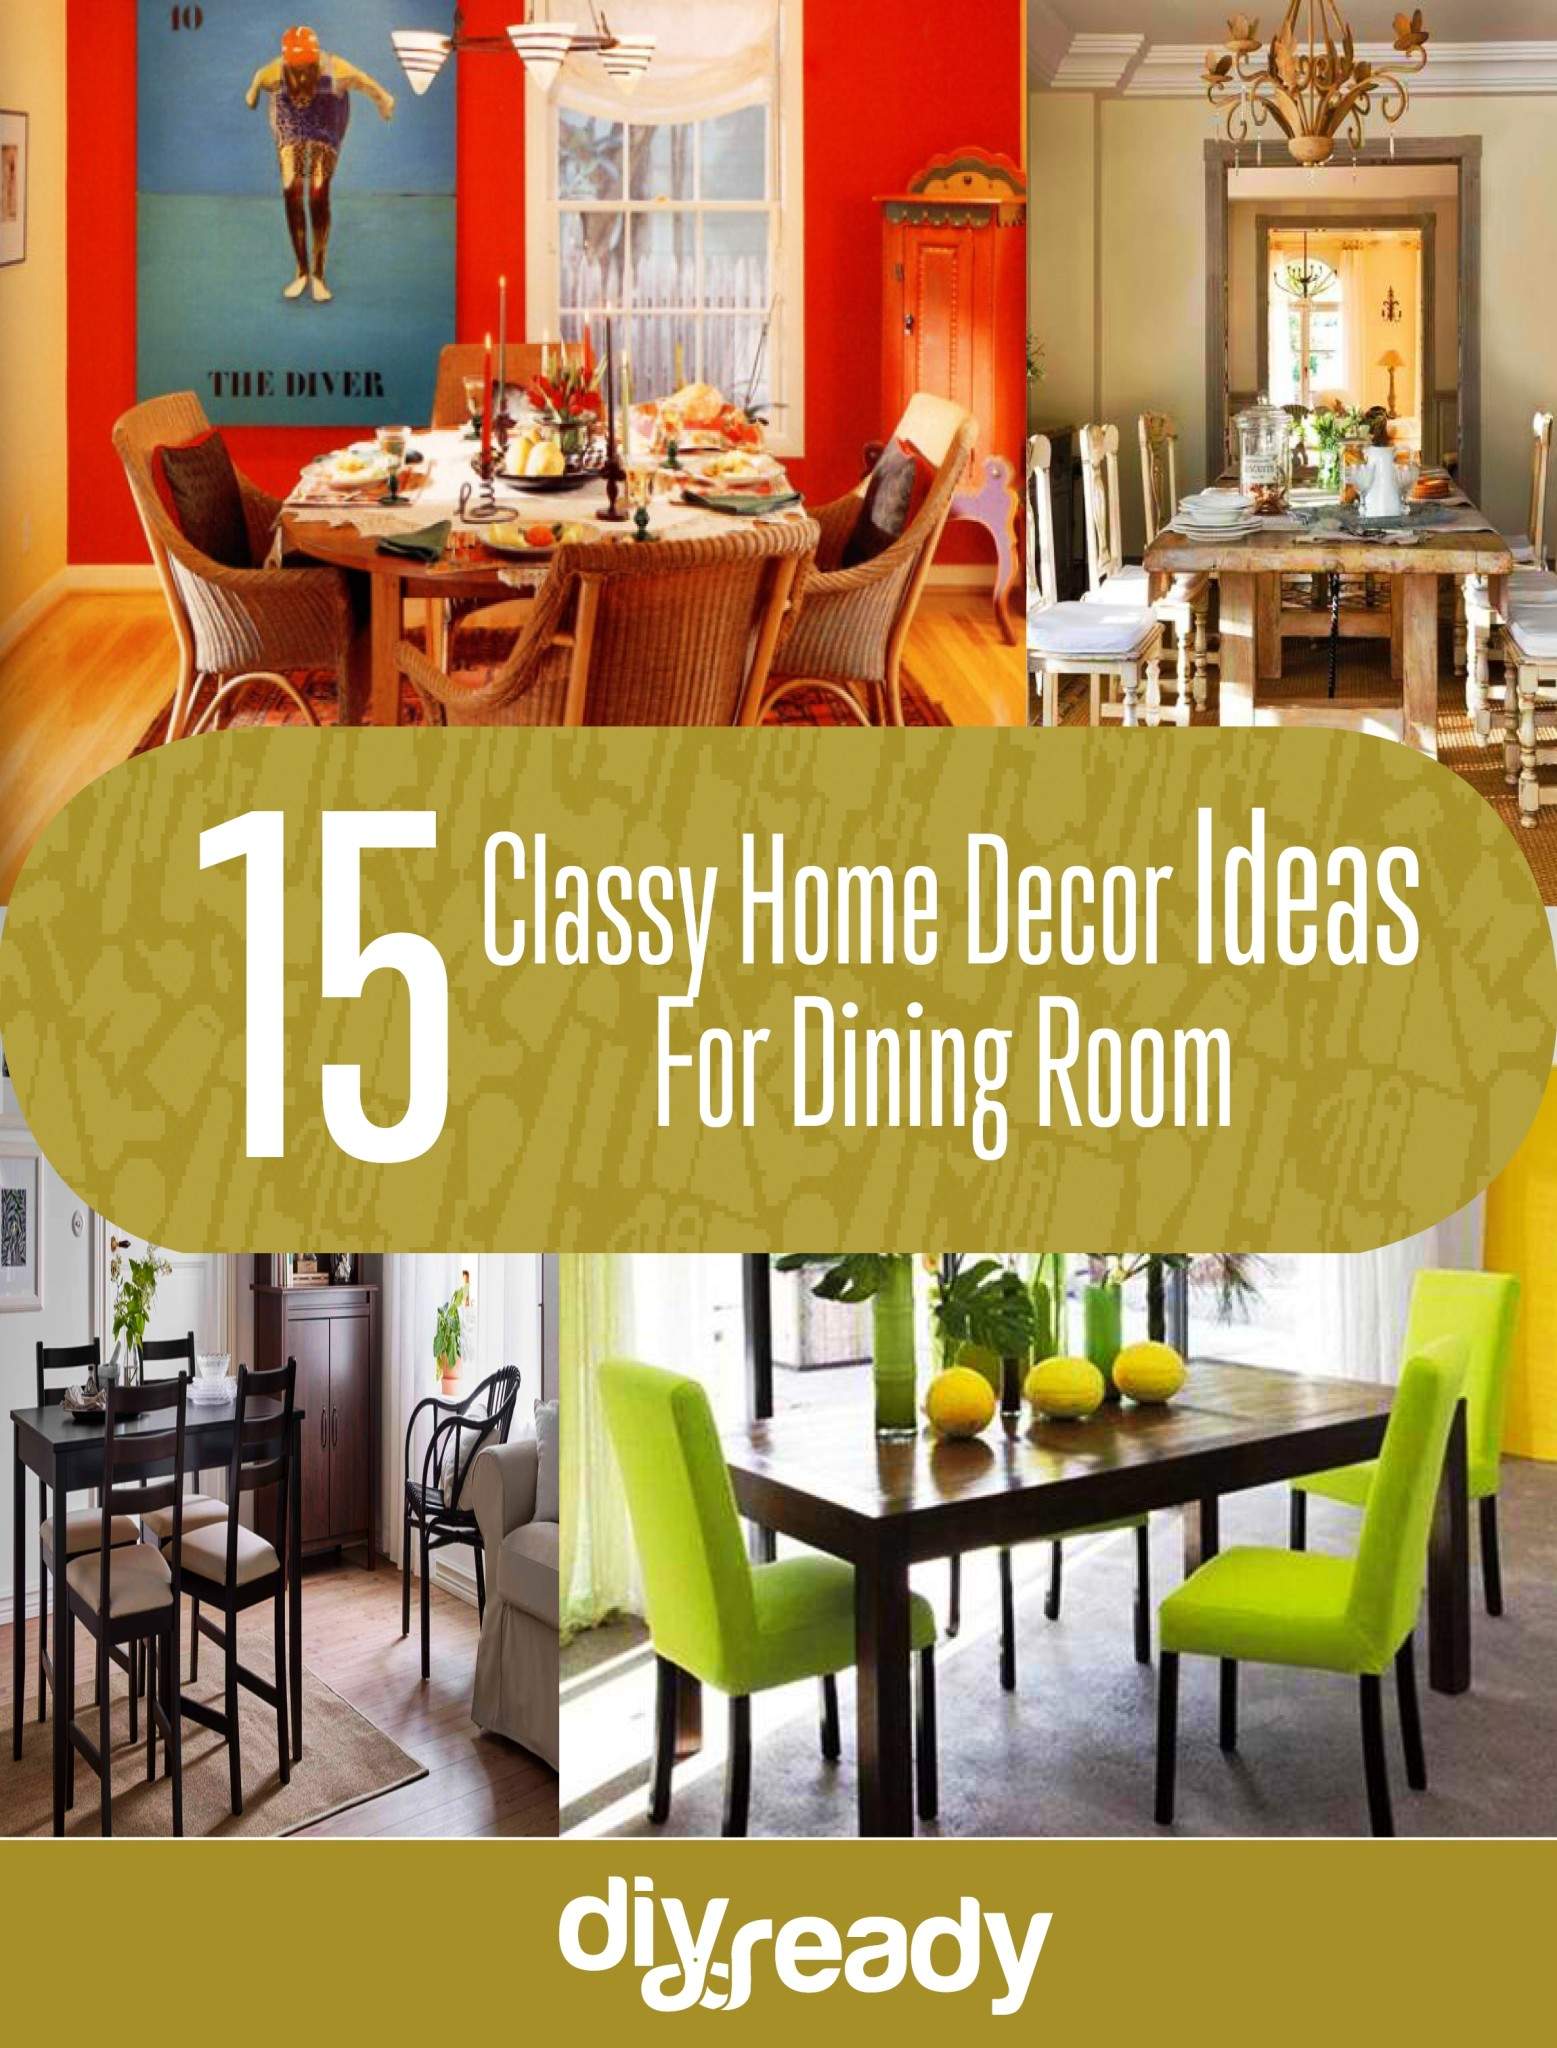 Classy Home Decor Ideas For Dining Room